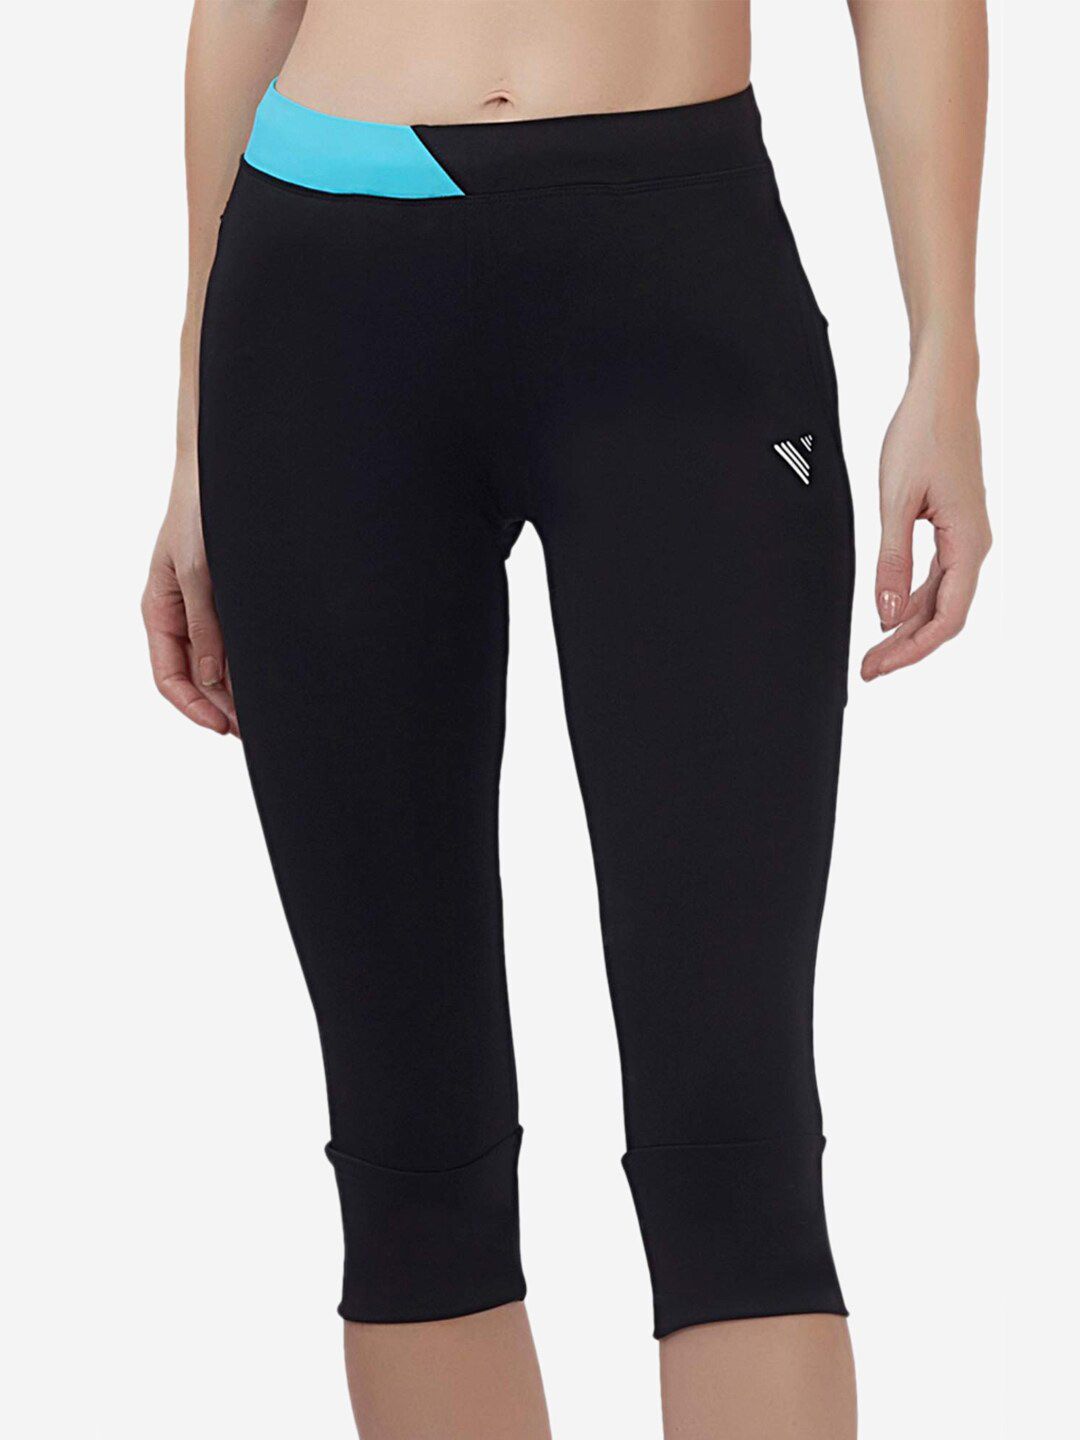 VELOZ Women Black Multisport Three-Fourth Length Tights with Pocket Price in India